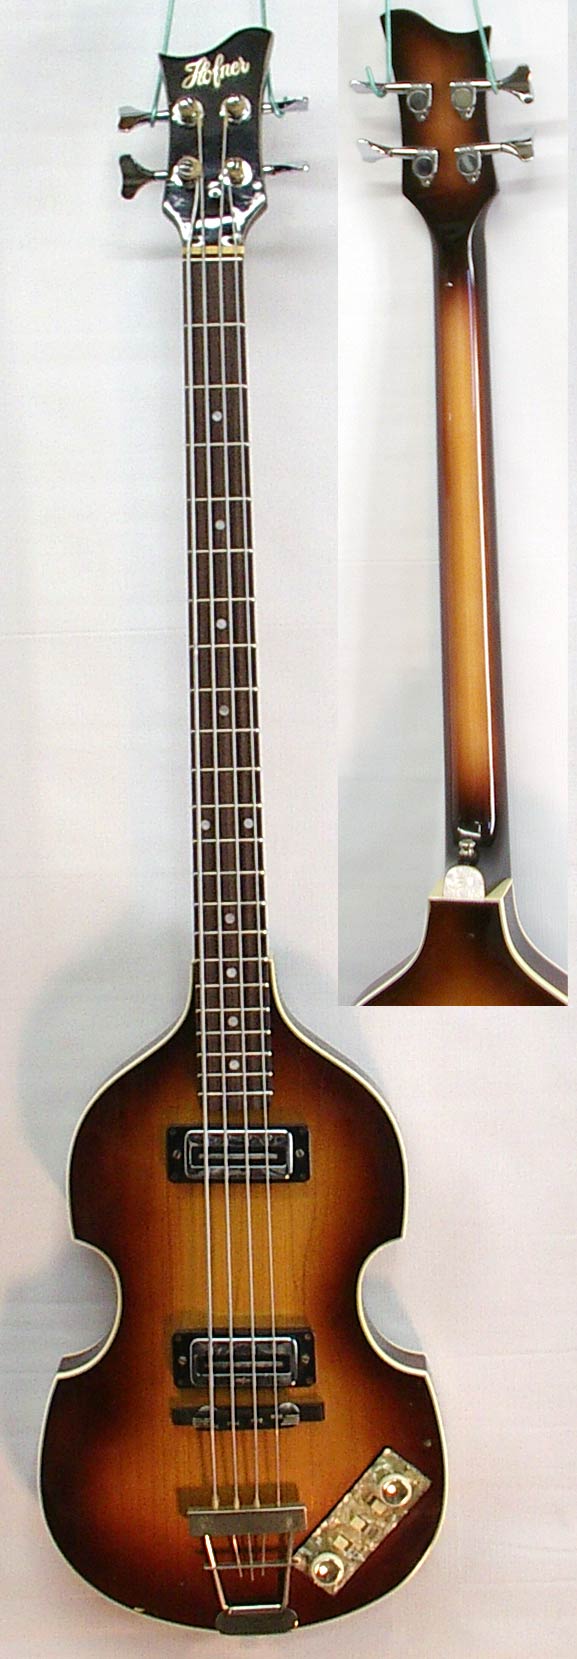 Hofner with new neck